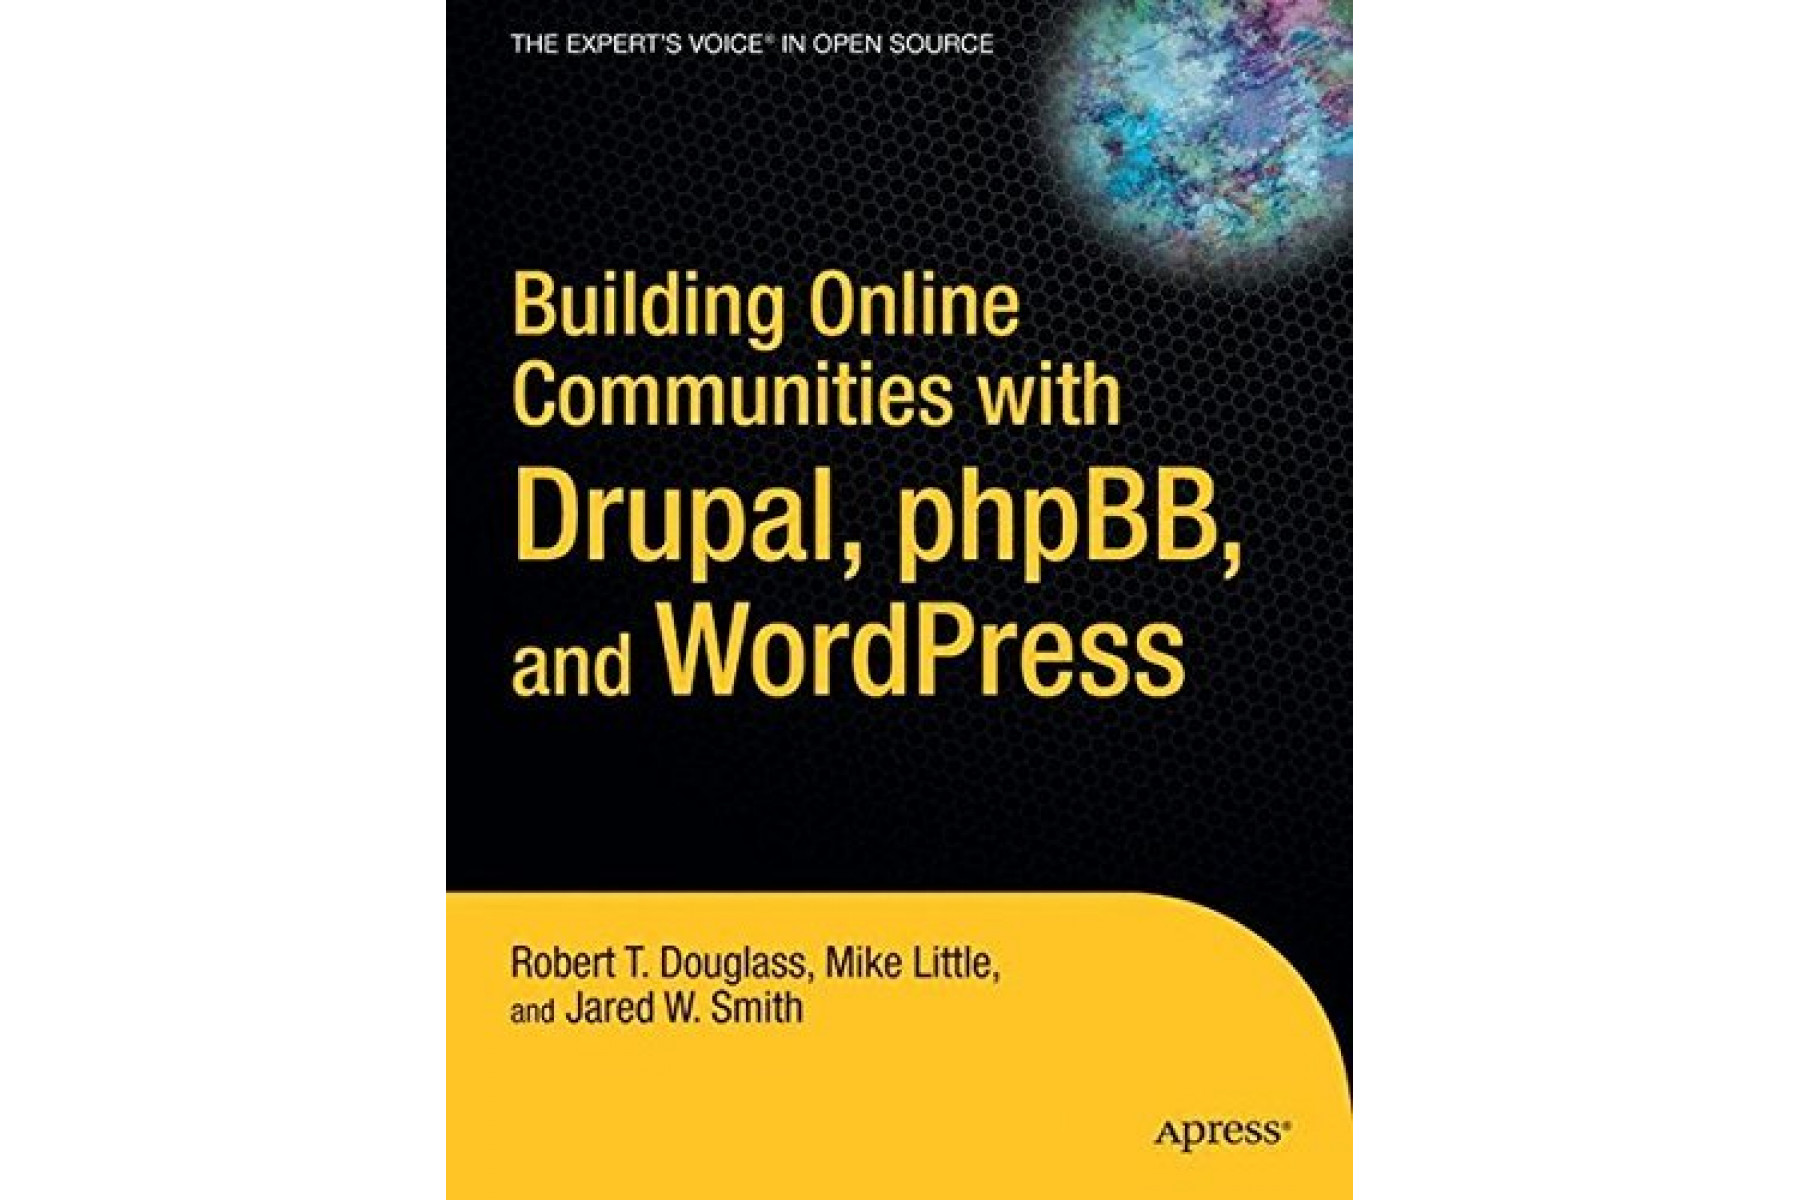 Building Online Communities with Drupal, phpBB, and WordPress (Expert's Voice in Open Source)